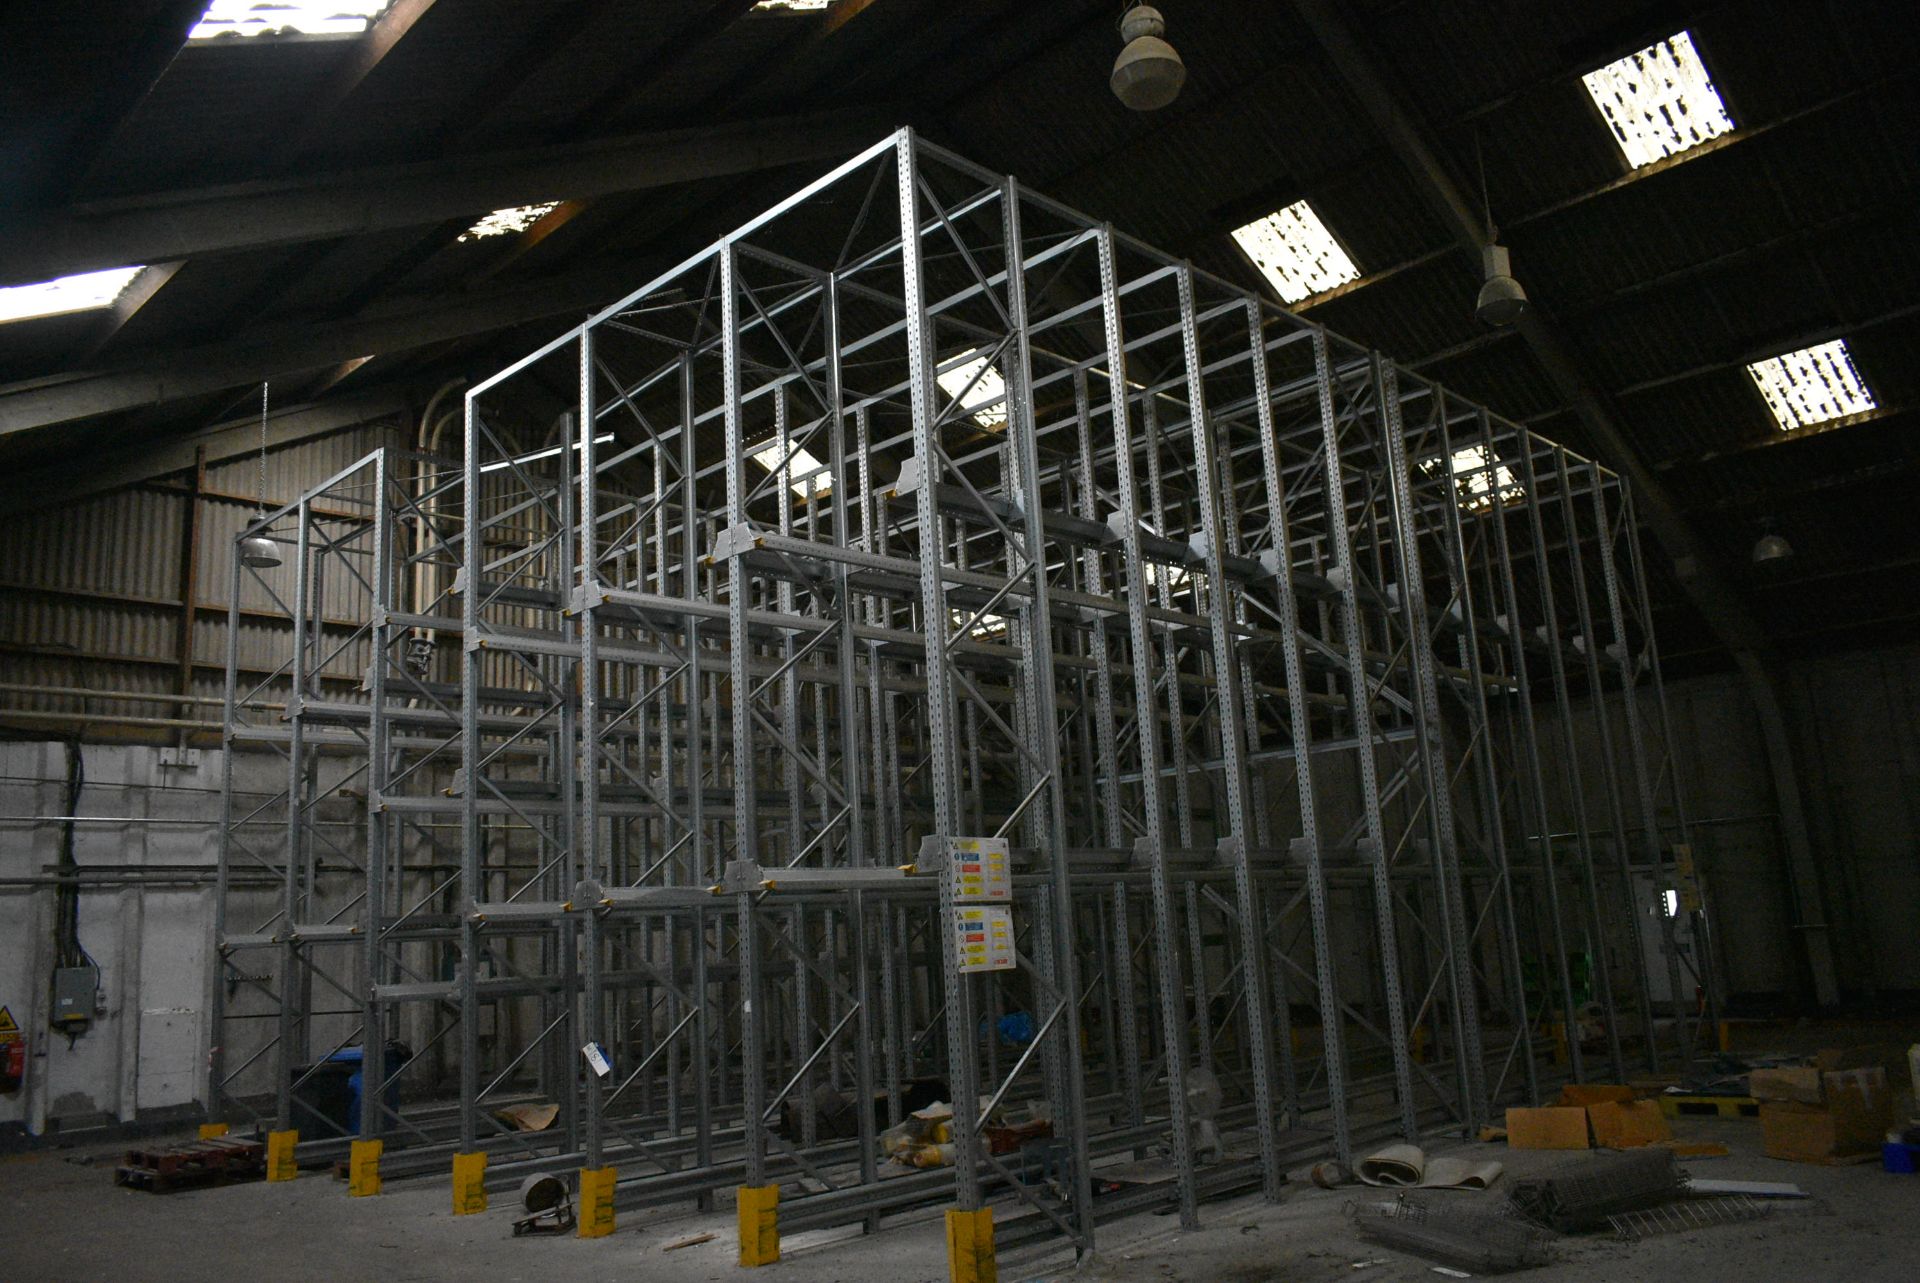 Dexion P90 M SIX BAY THREE TIER DRIVE-IN PALLET RACK, approx. 10m x 10.8m x 6m high overall, for - Image 4 of 6